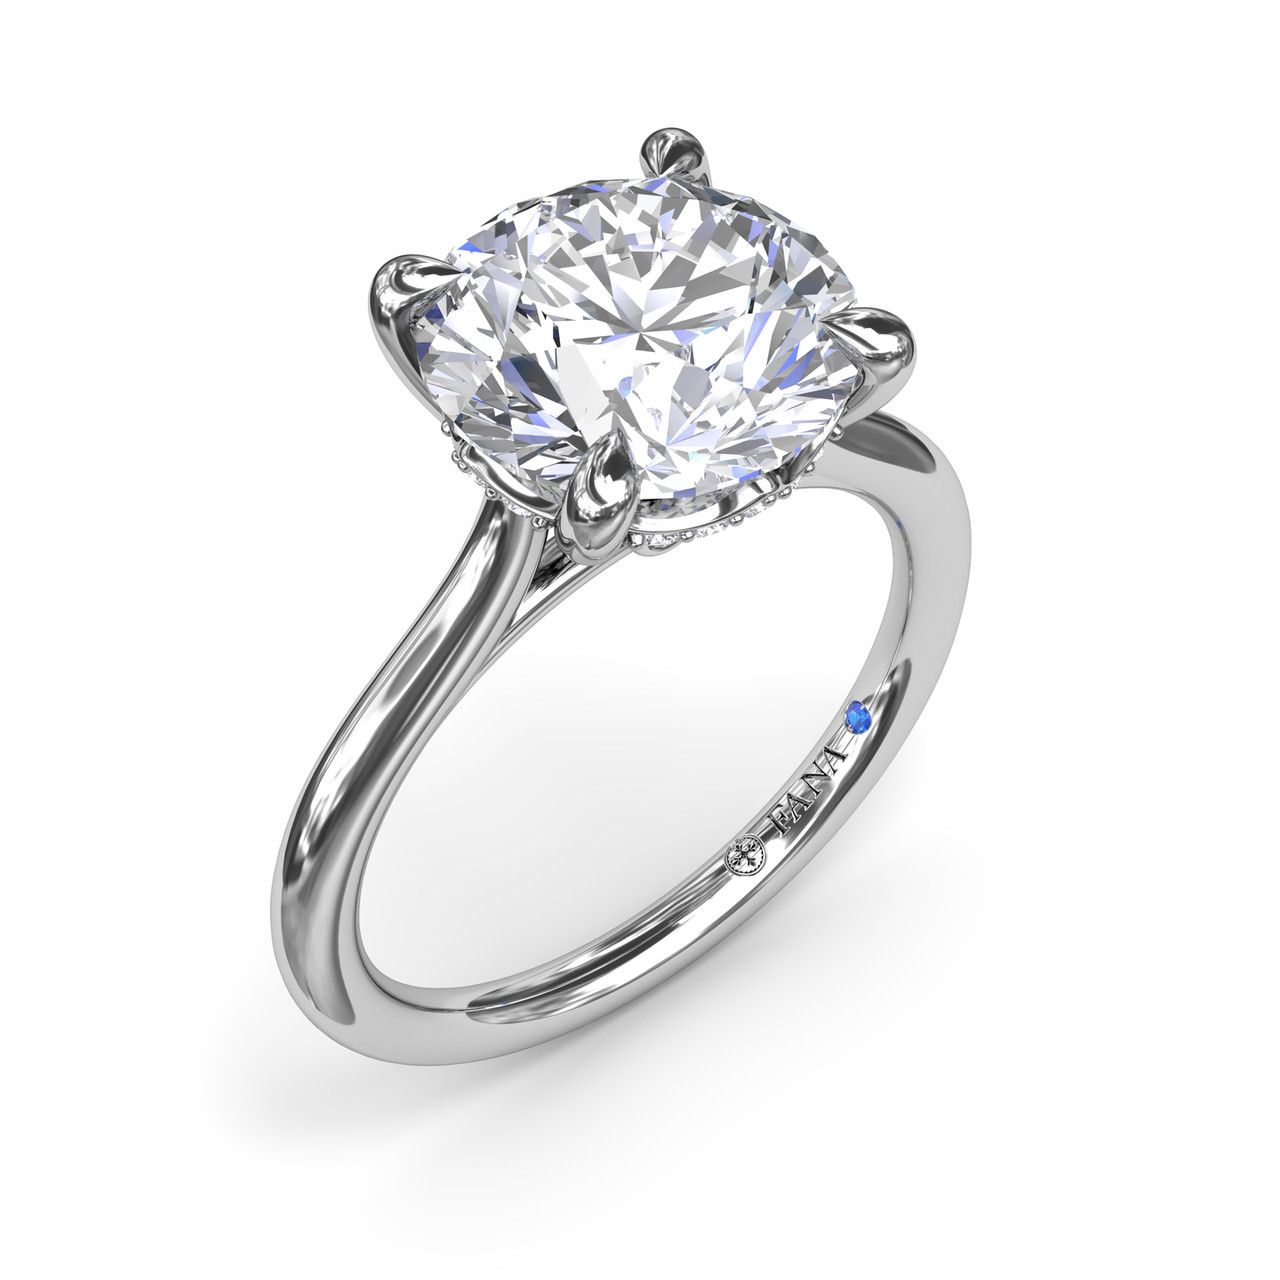 14K WHITE GOLD SOLITAIRE SEMI-MOUNT RING SIZE 6.5 WITH 18=0.10TW ROUND G-H VS2-SI1 DIAMONDS AND ONE ROUND BLUE SAPPHIRE   (4.03 GRAMS)